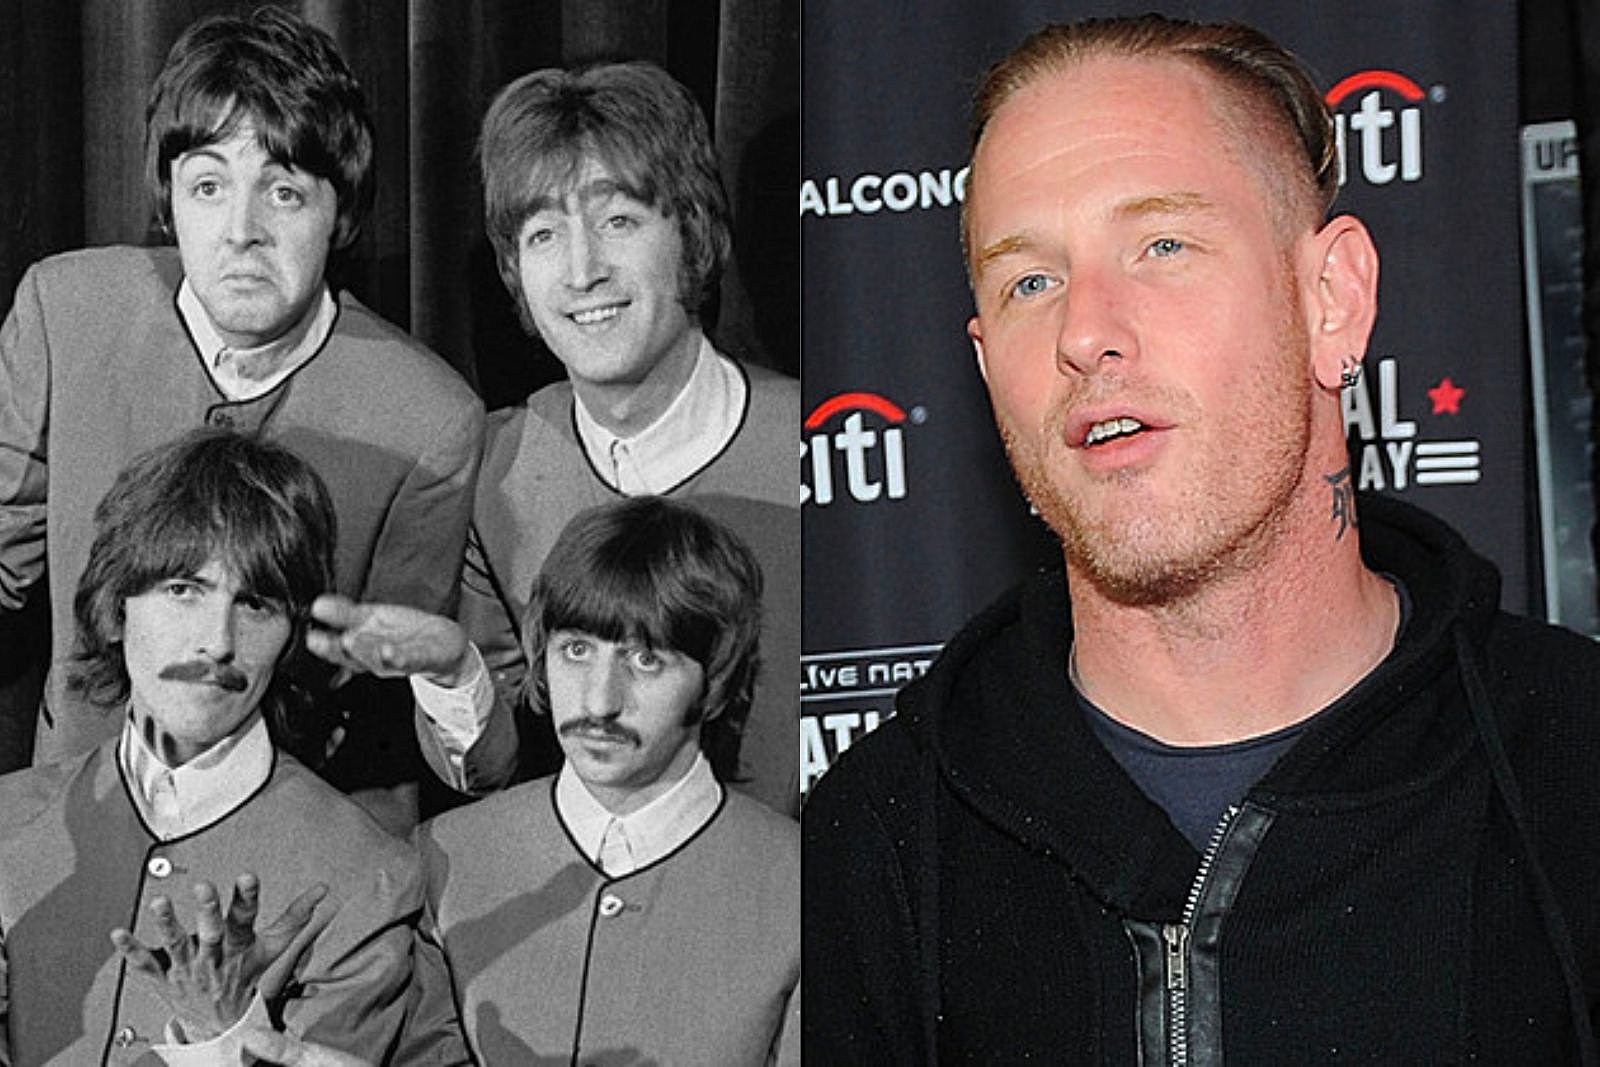 The Beatles Song Corey Taylor Thinks Is ‘Hippie Garbage’